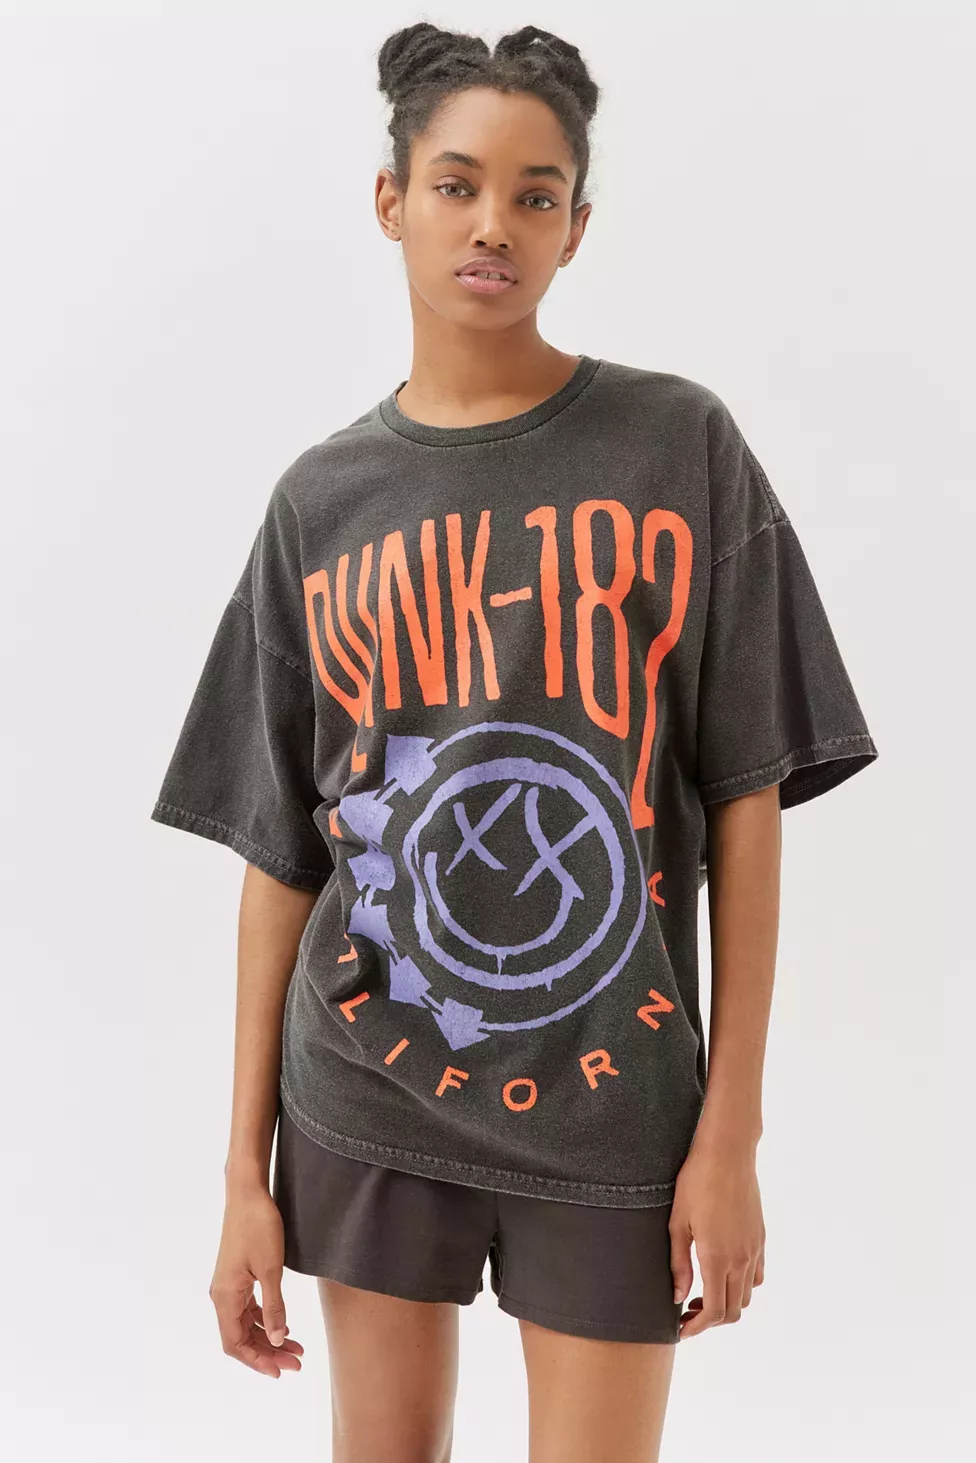 Blink 182 T-Shirt Dress curated on LTK